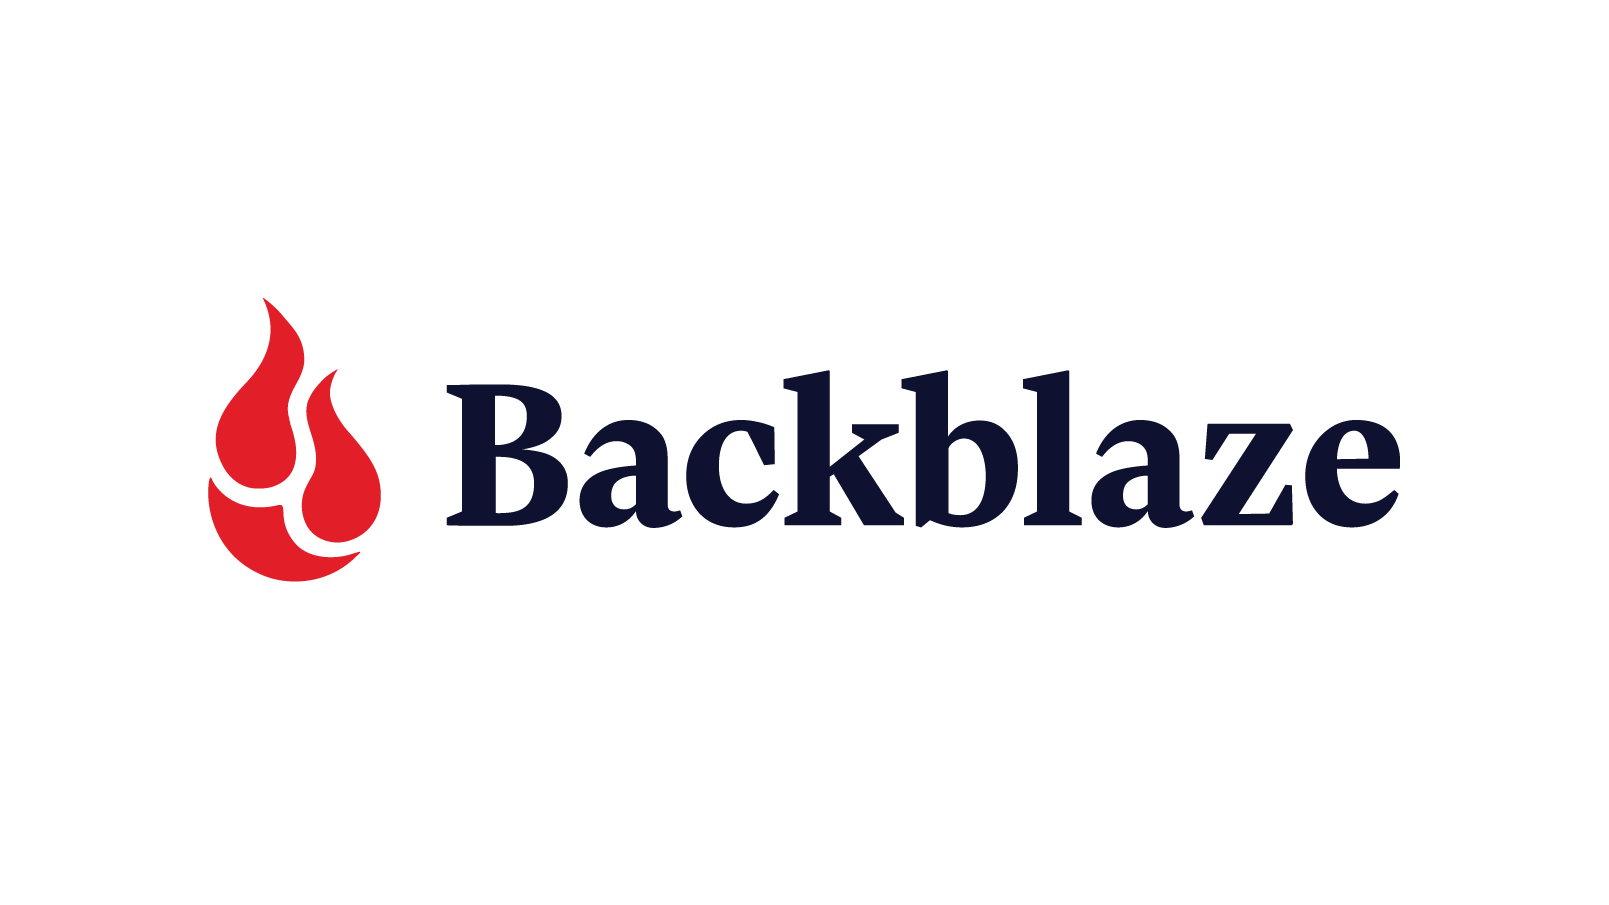 Backblaze to Speak at the 19th Annual Needham Technology Conference